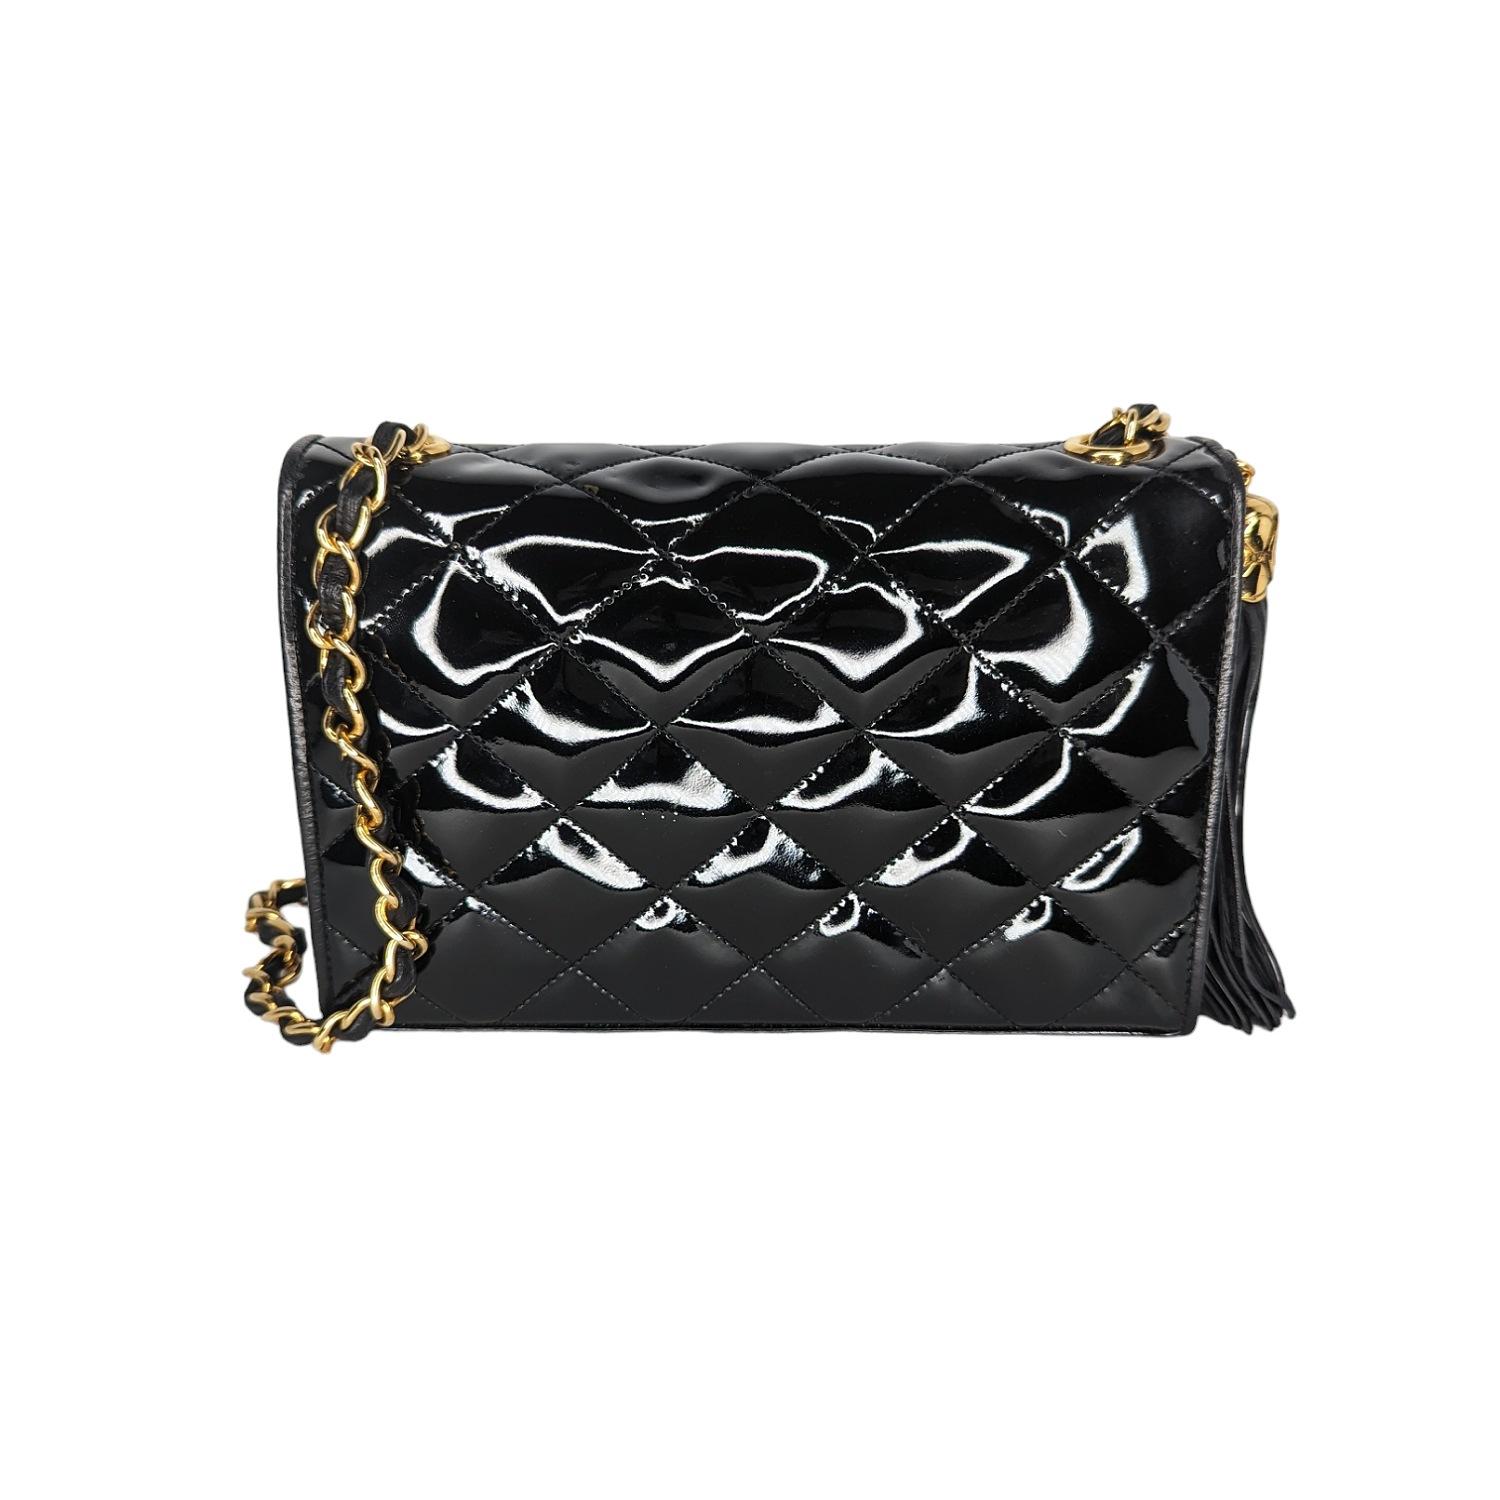 Chanel Vintage Patent Quilted CC Tassel Flap Bag in black. Featuring an interlocking CC logo at front face, 24K plated gold-tone hardware, leather threaded chain link shoulder strap, tassel accent, single interior pocket, leather lining and flap